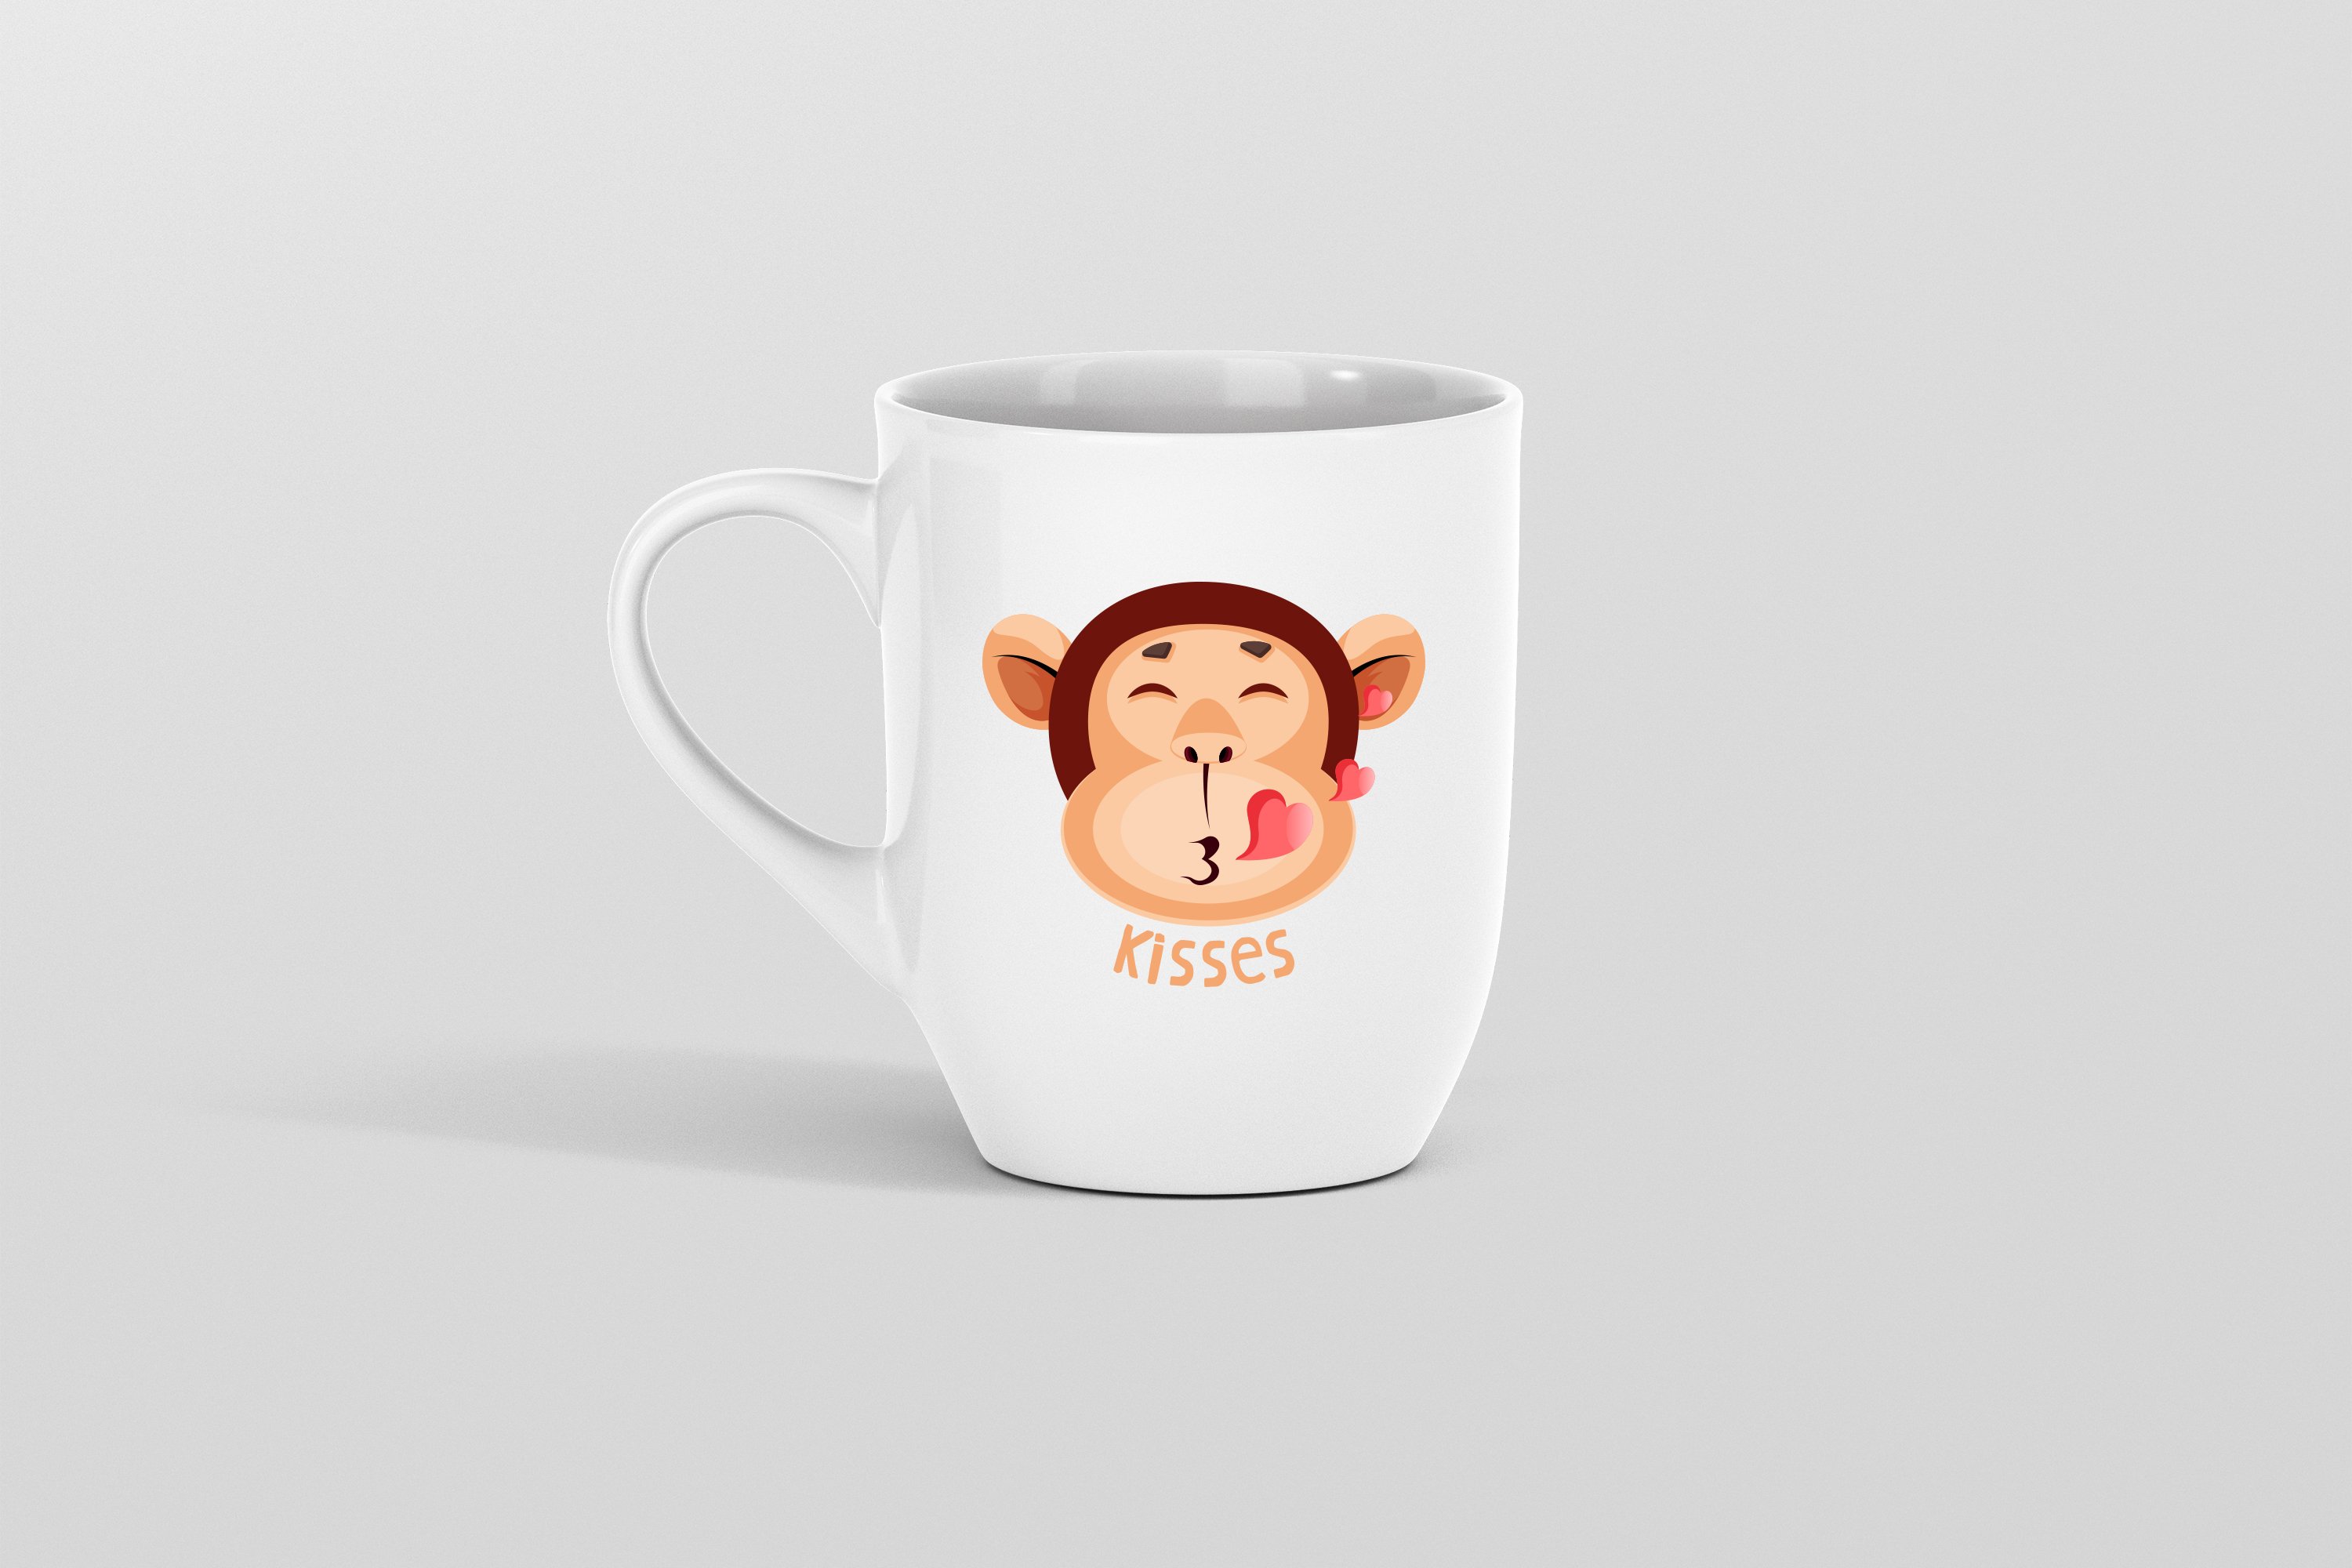 Monkey faces on cup prints.